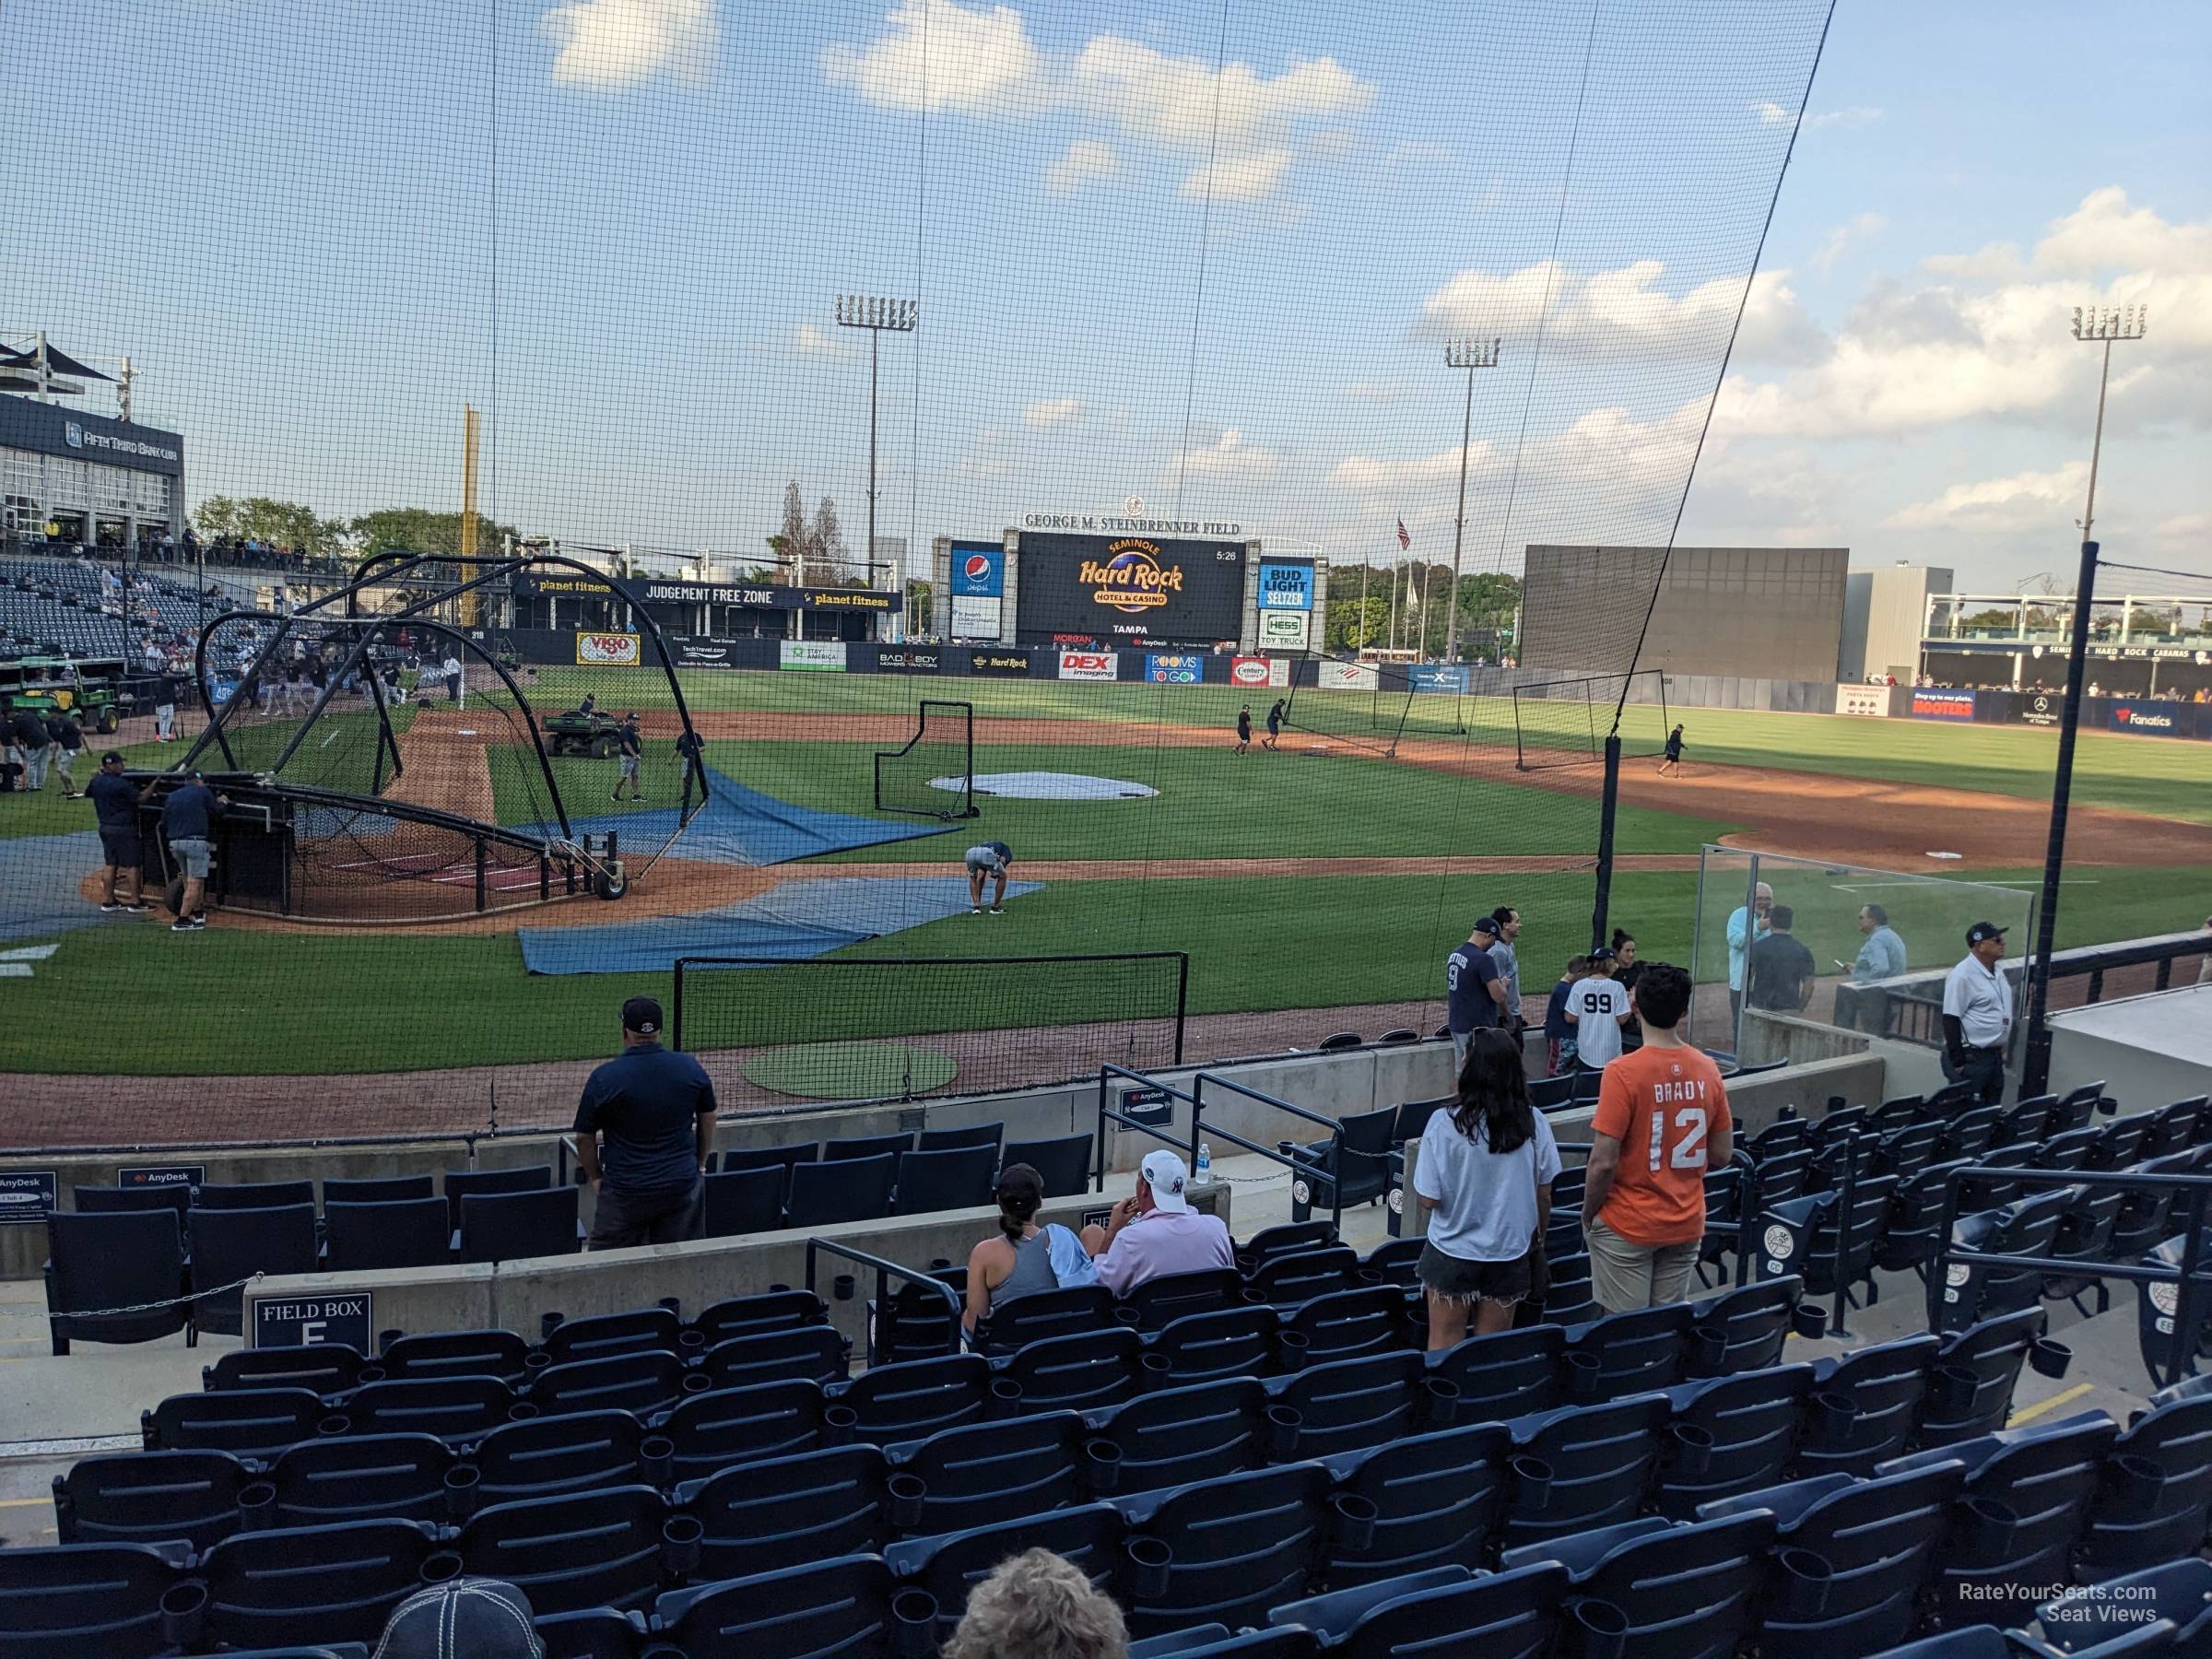 section 108, row jj seat view  - george steinbrenner field